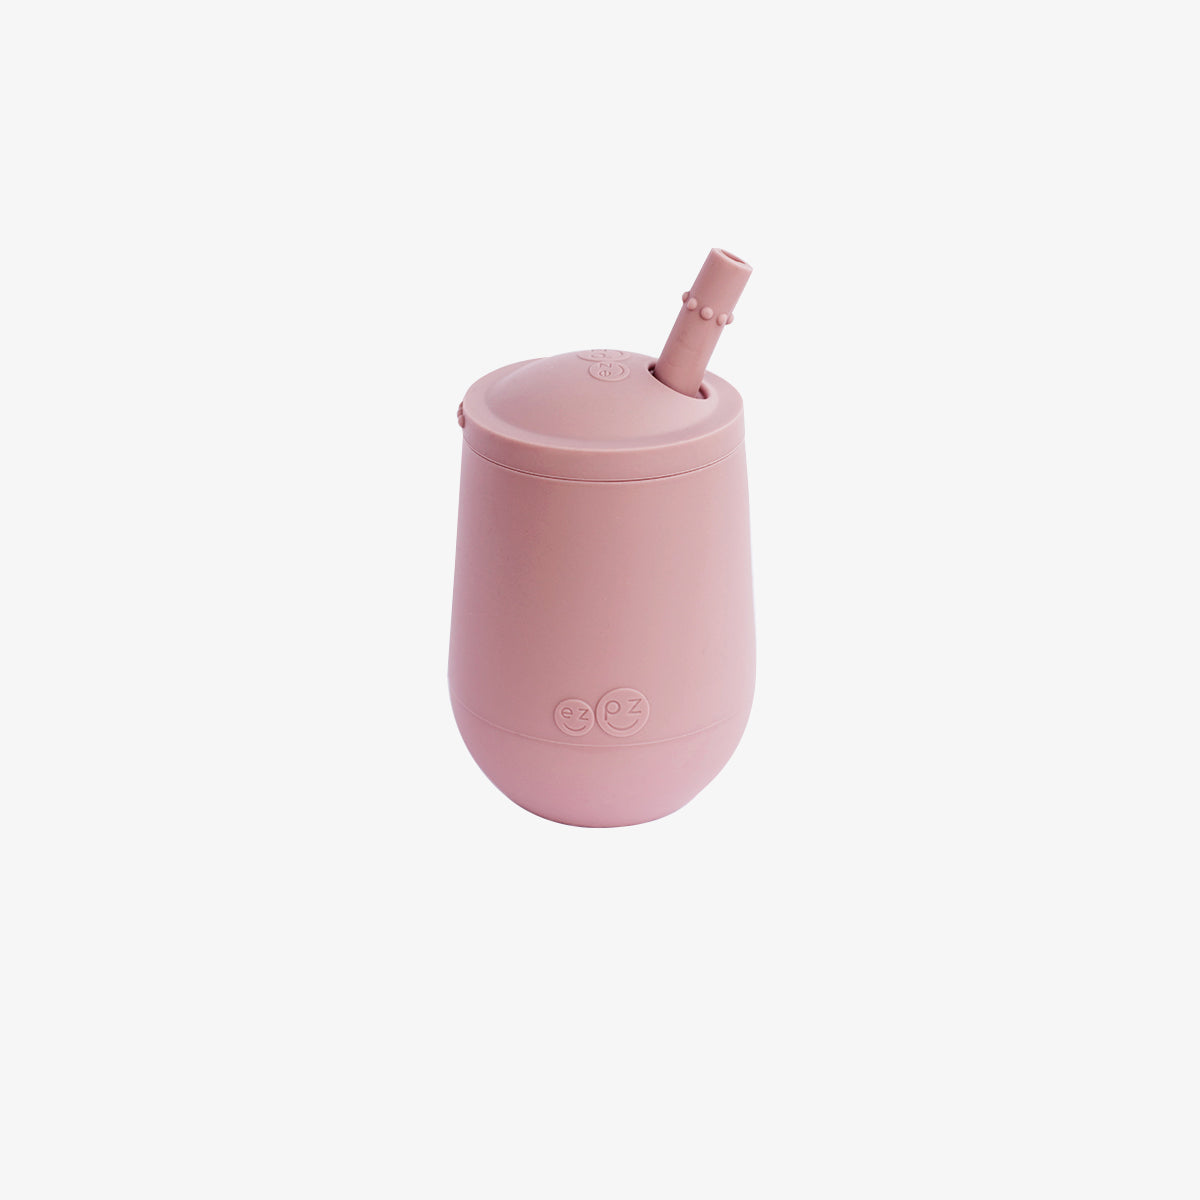 The Mini Cup + Straw in Blush by ezpz / Silicone Drinking Cup and Straw Training System for Toddlers